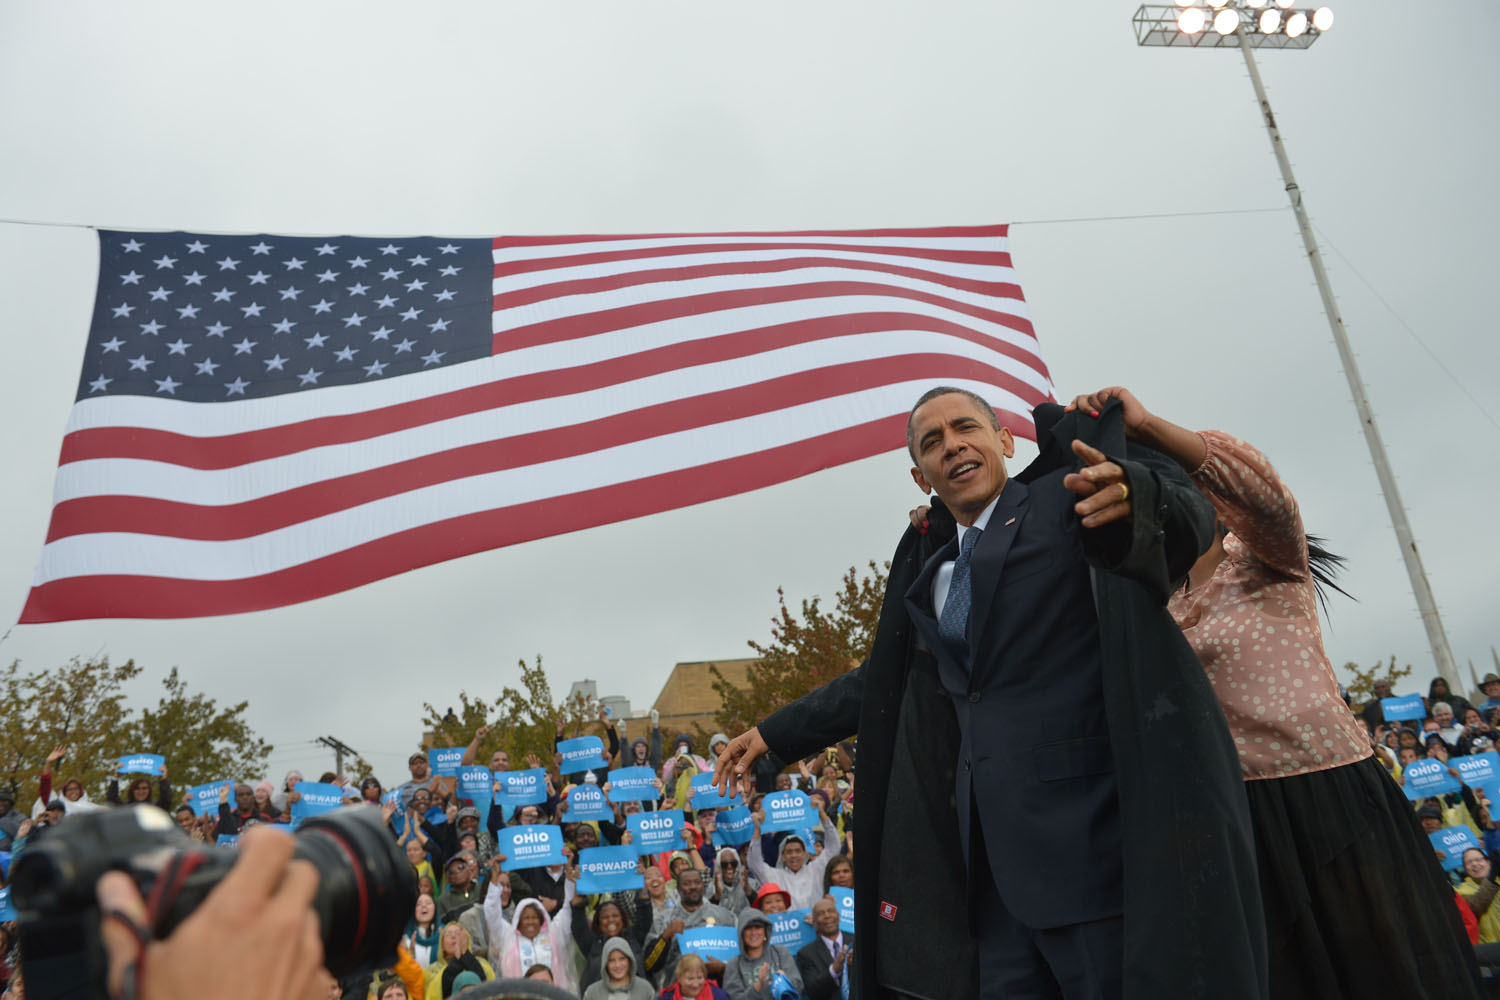 Oct. 5, 2012. U.S. President Barack Obama arrives on stage during a campaign rally at Cleveland State University in Cleveland.